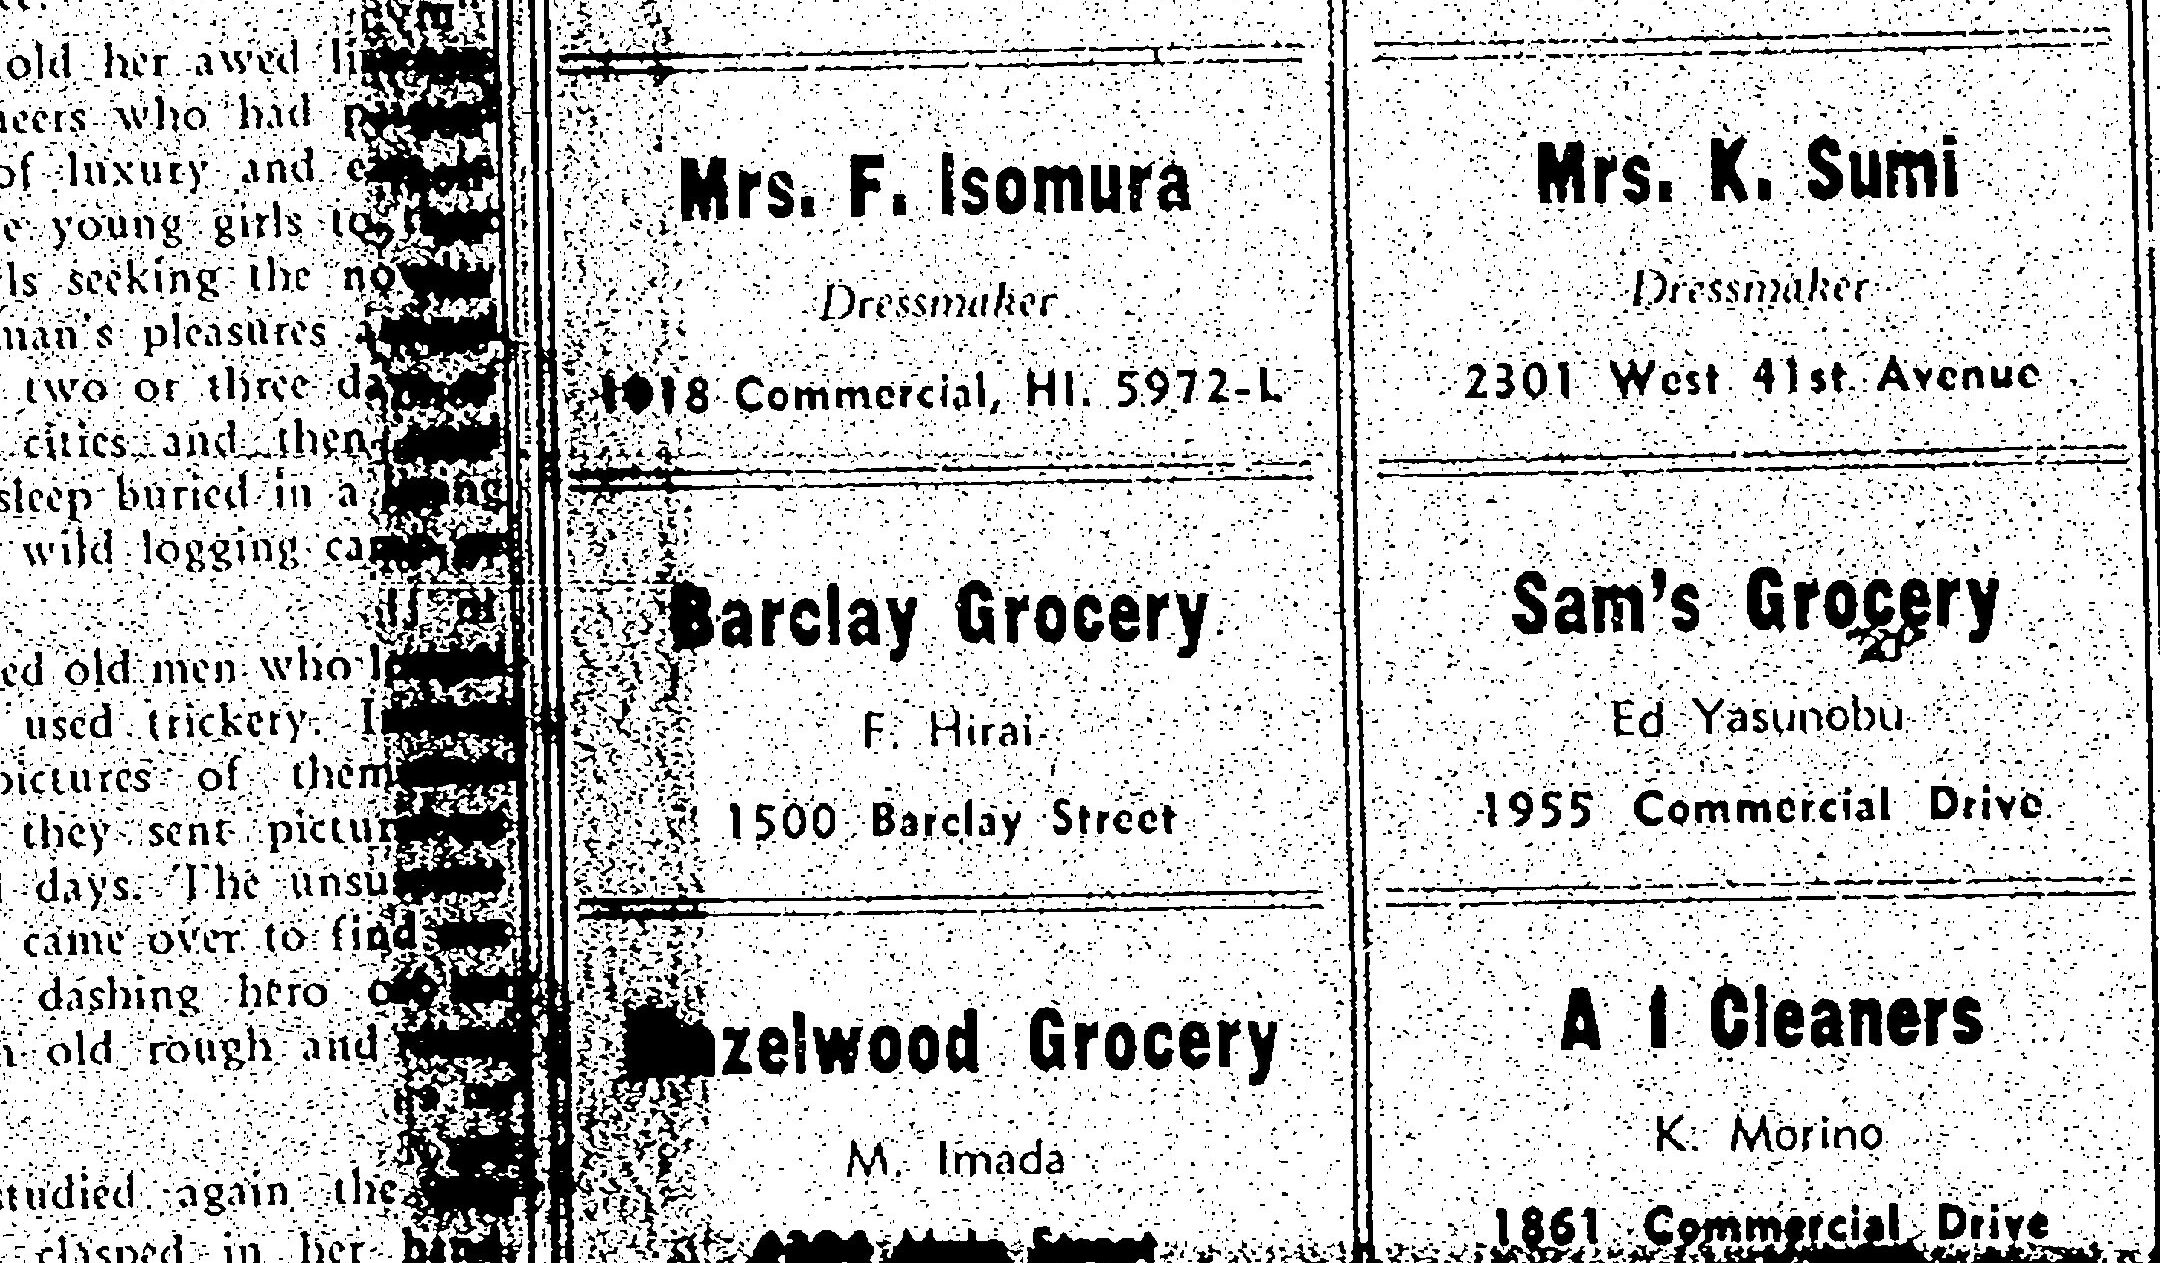 Scanned newspaper from July 1, 1940 that lists black and white advertisement of local businesses including Mrs. F Isomura, Dressmaker at 1918 Commerical Drive